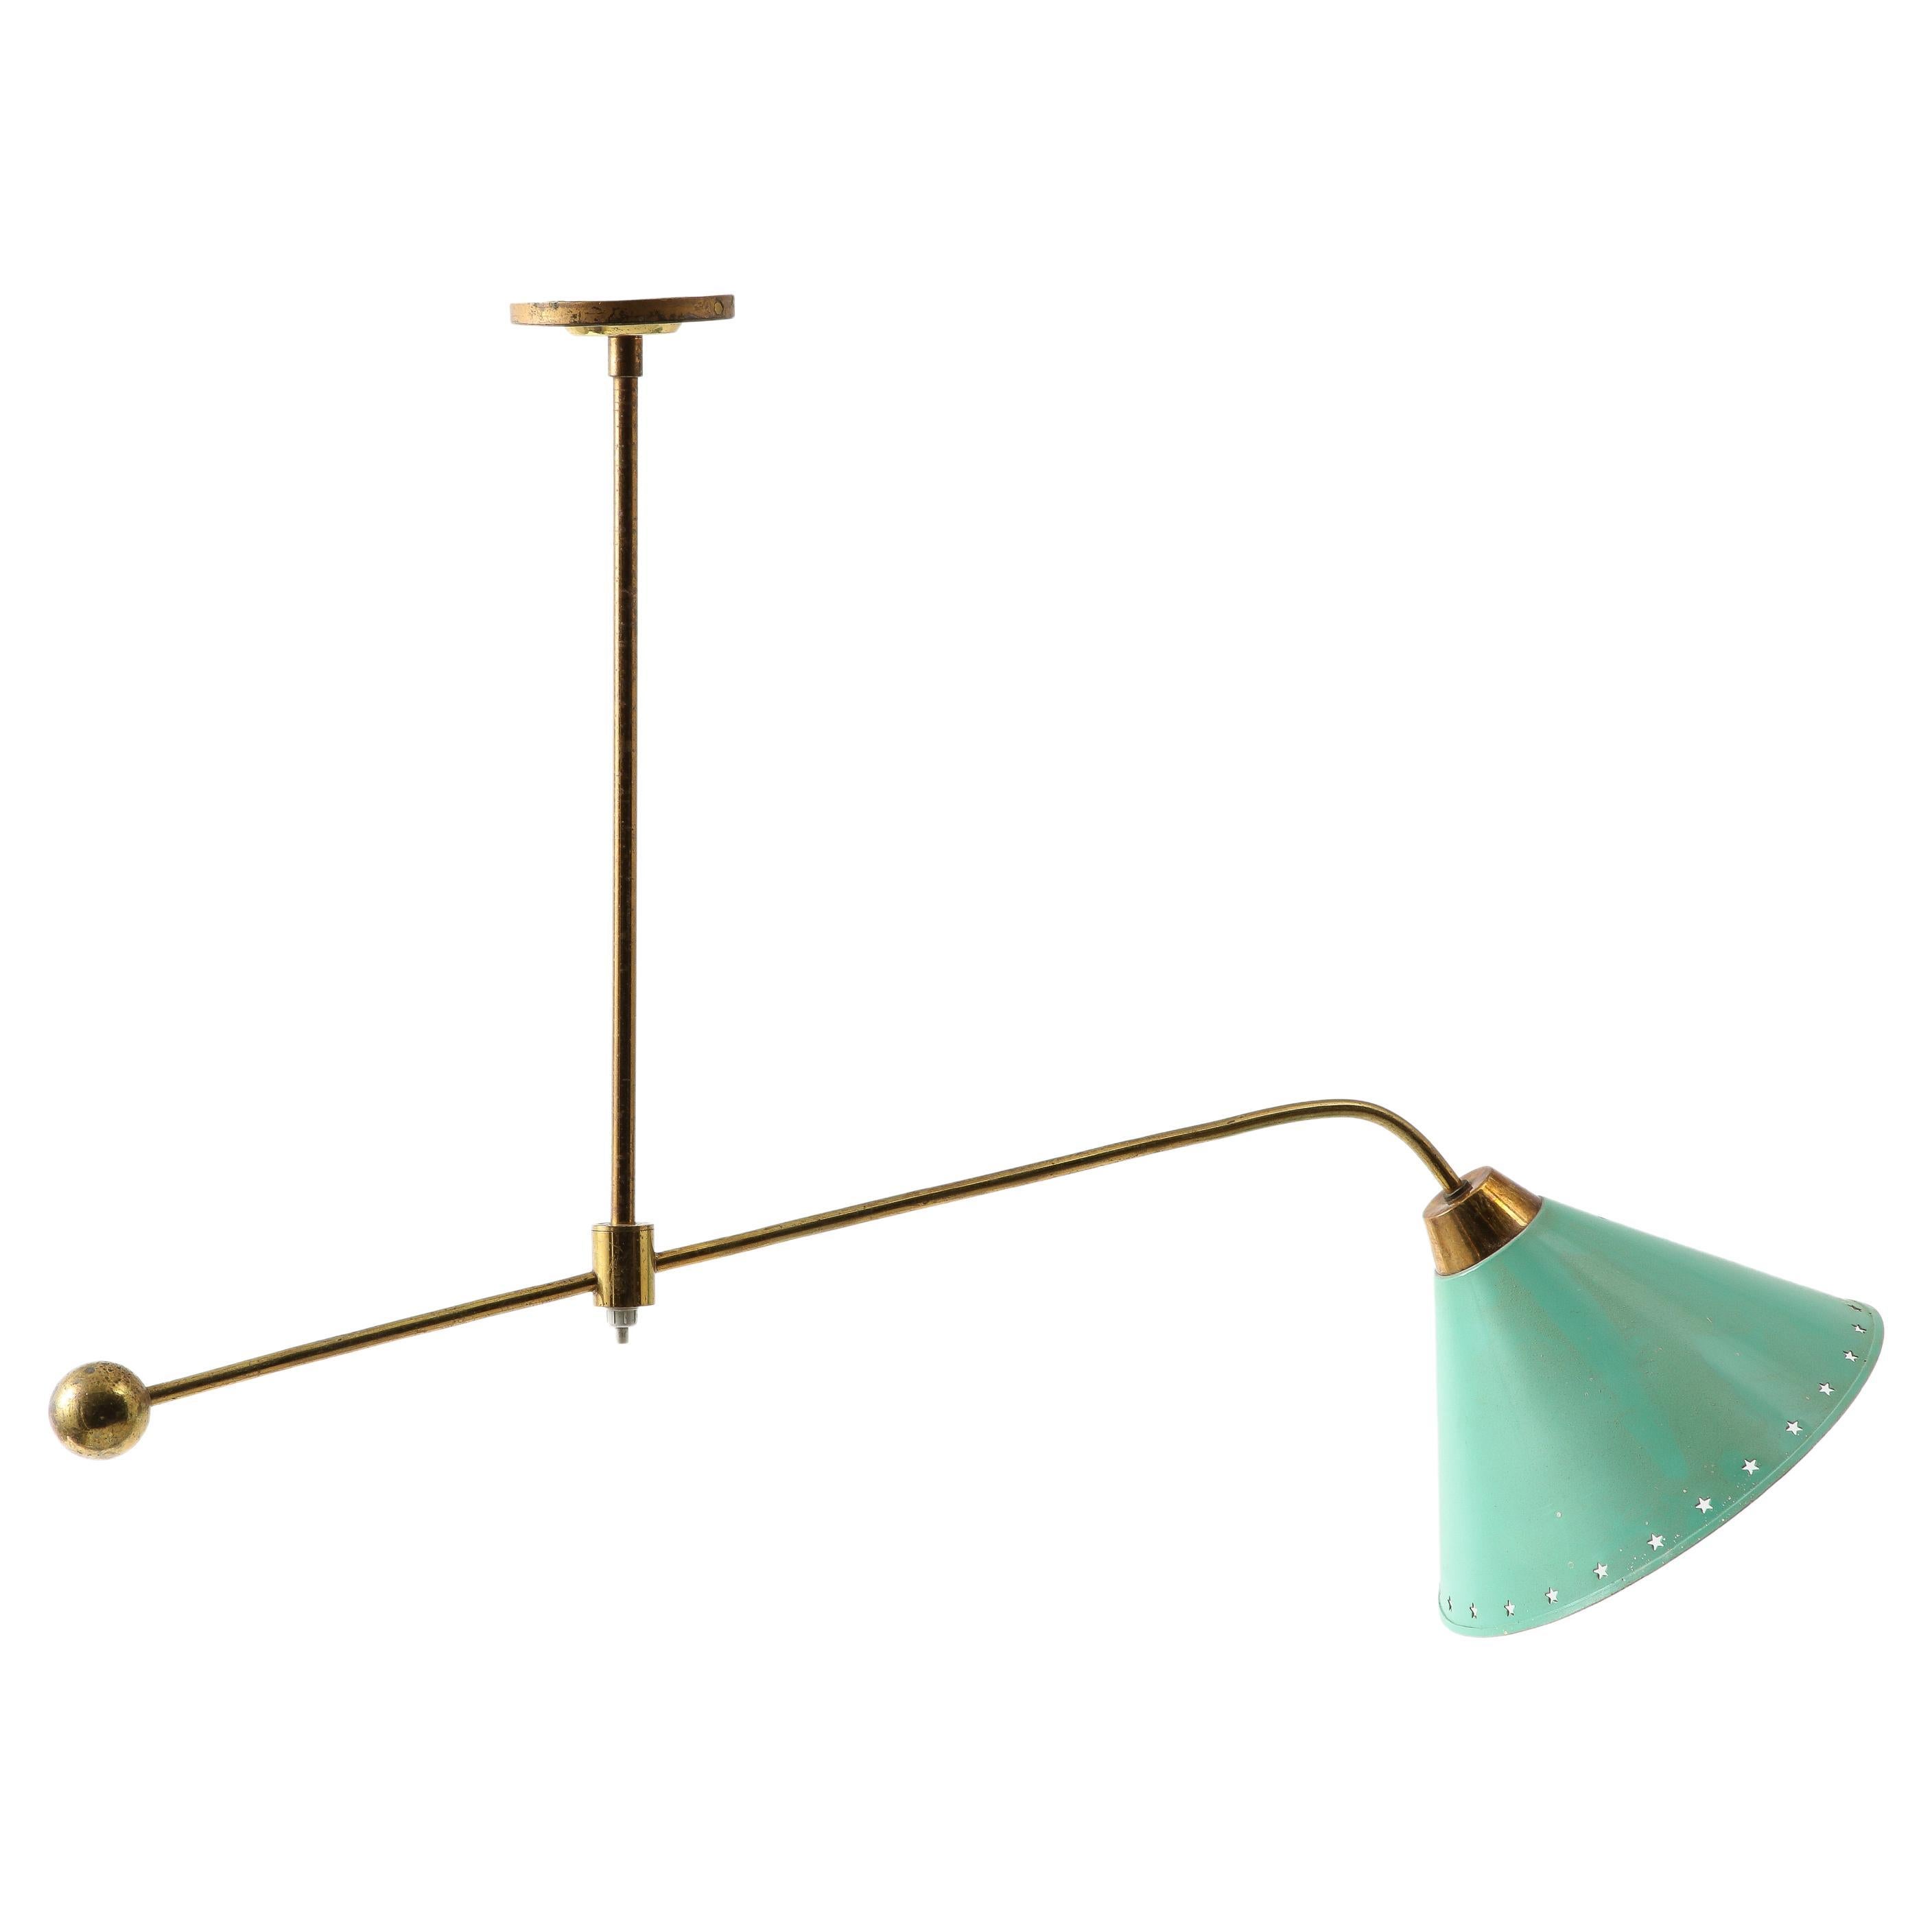 Arlus Brass Asymmetrical Ceiling Fixture with Green Shade, France 1960's